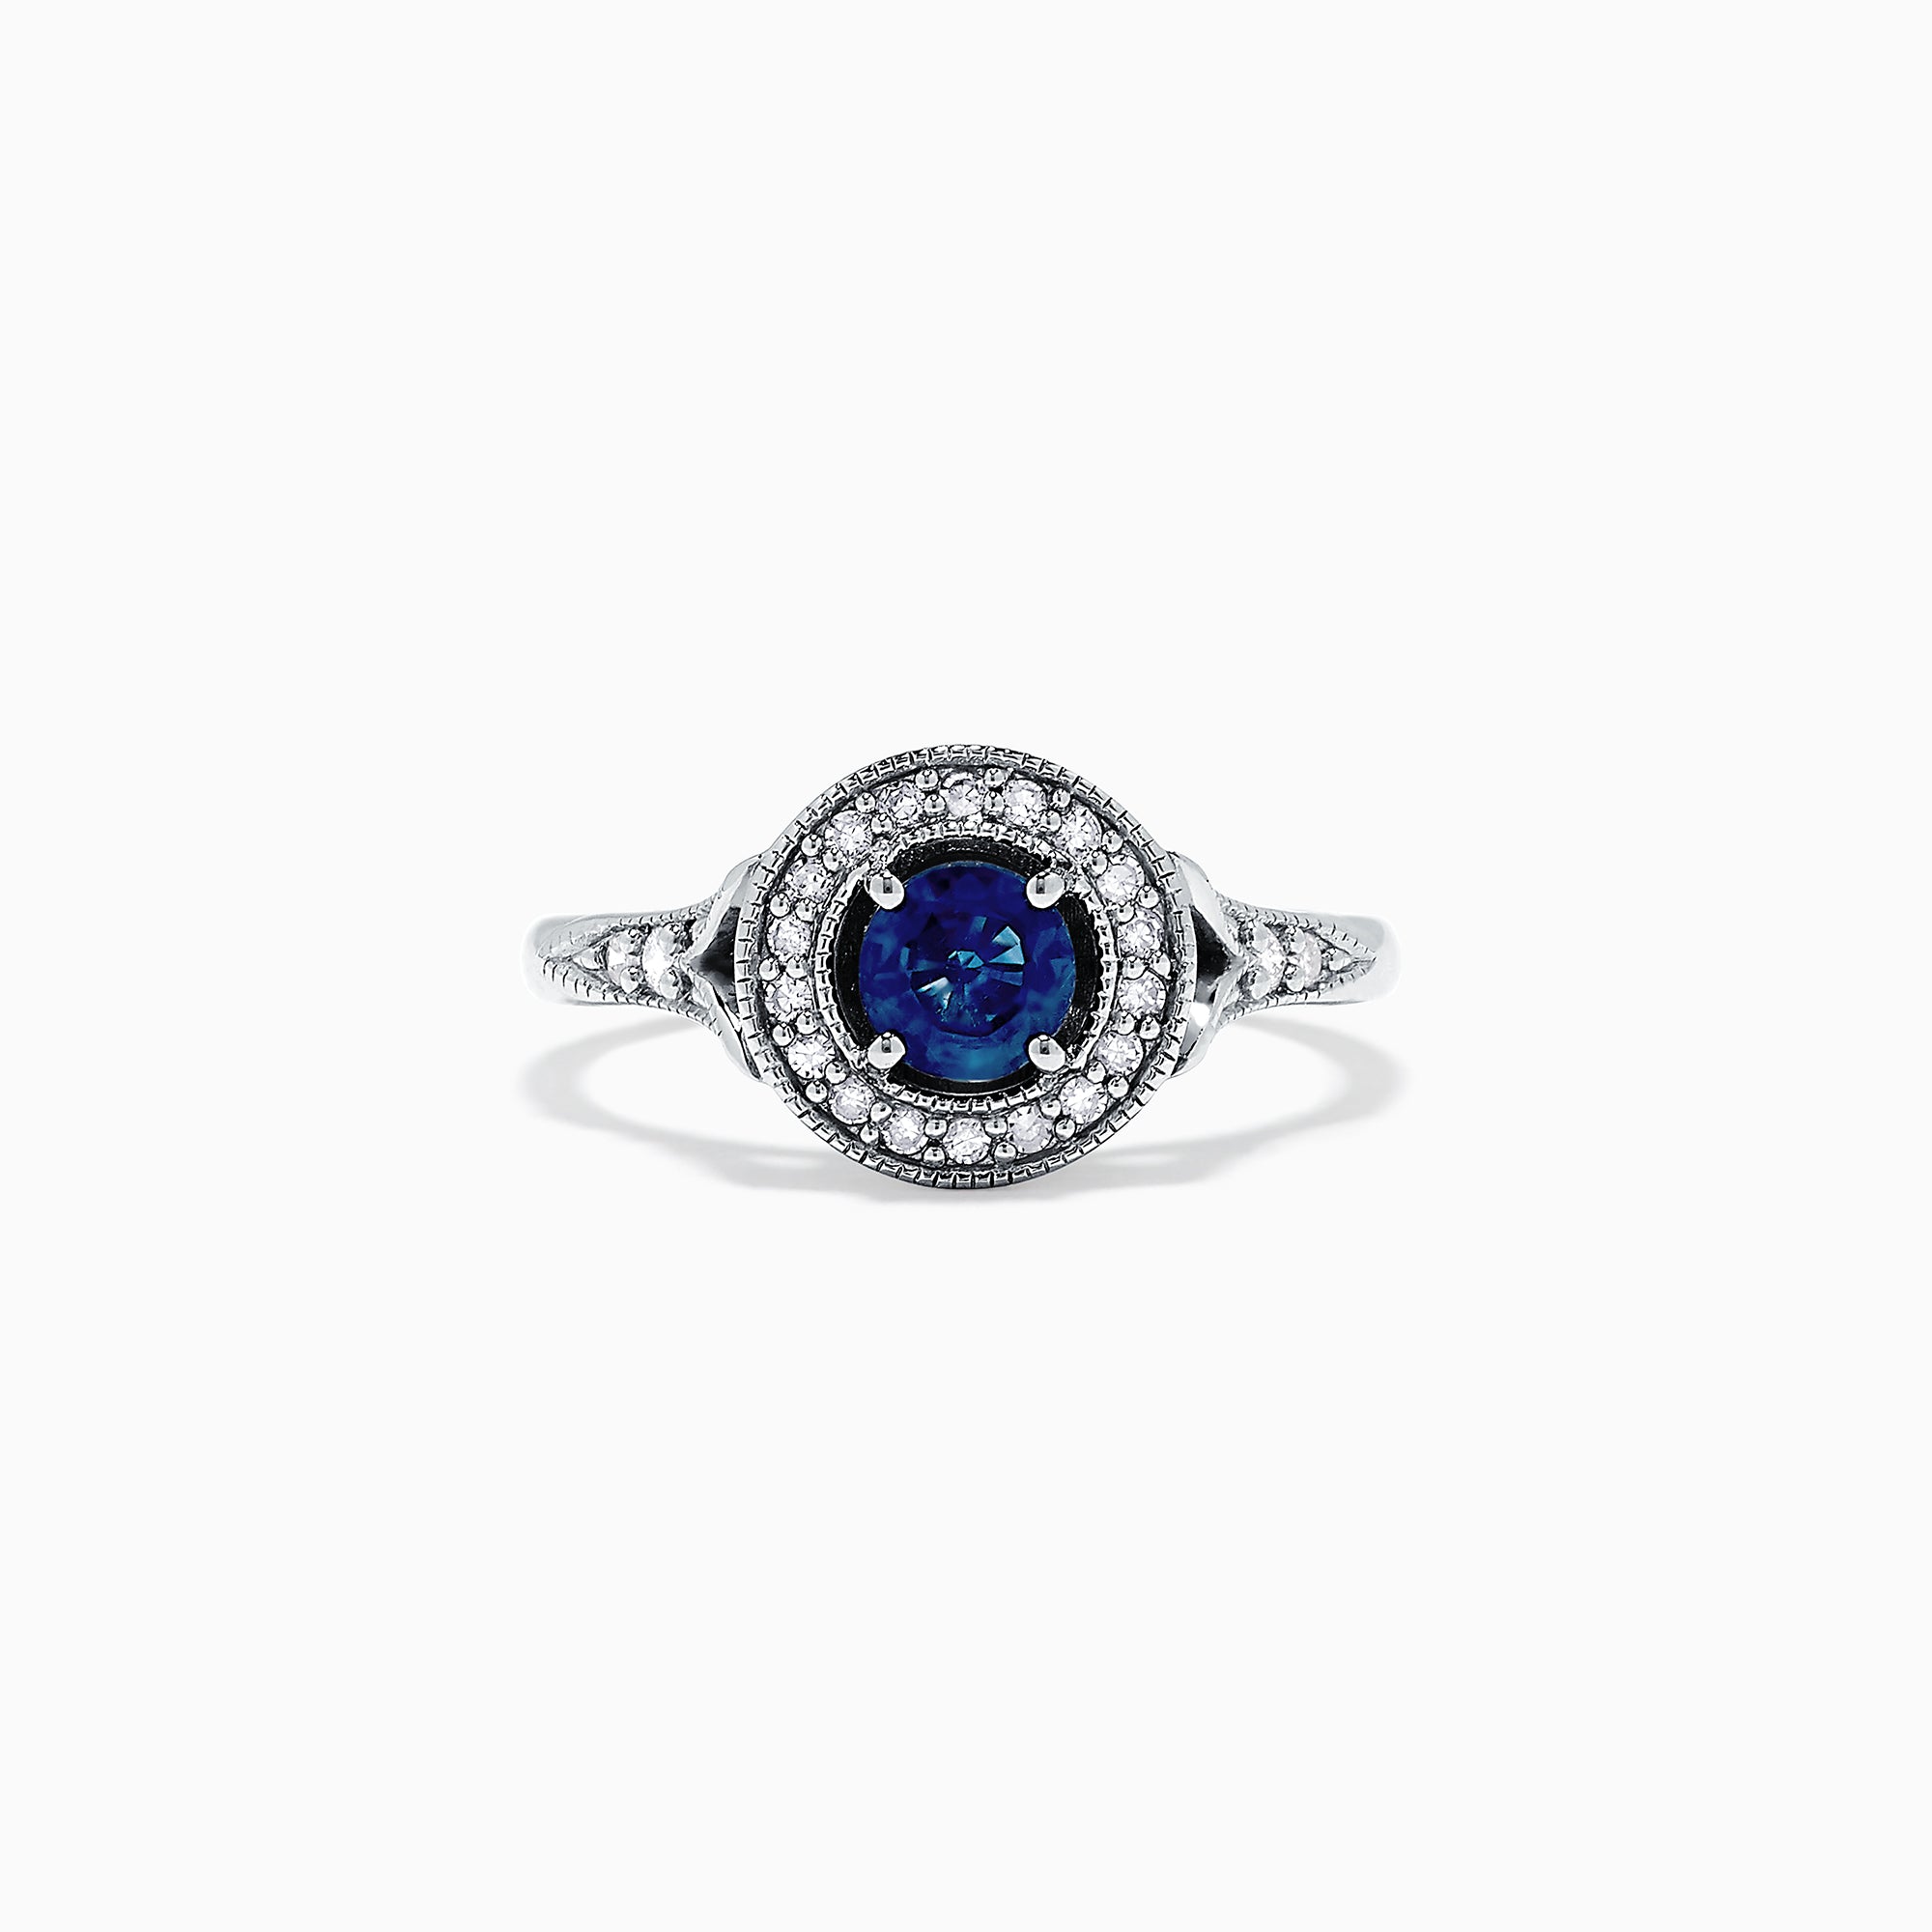 Effy 925 Sterling Silver Blue Sapphire and Diamond Ring, 0.72 TCW